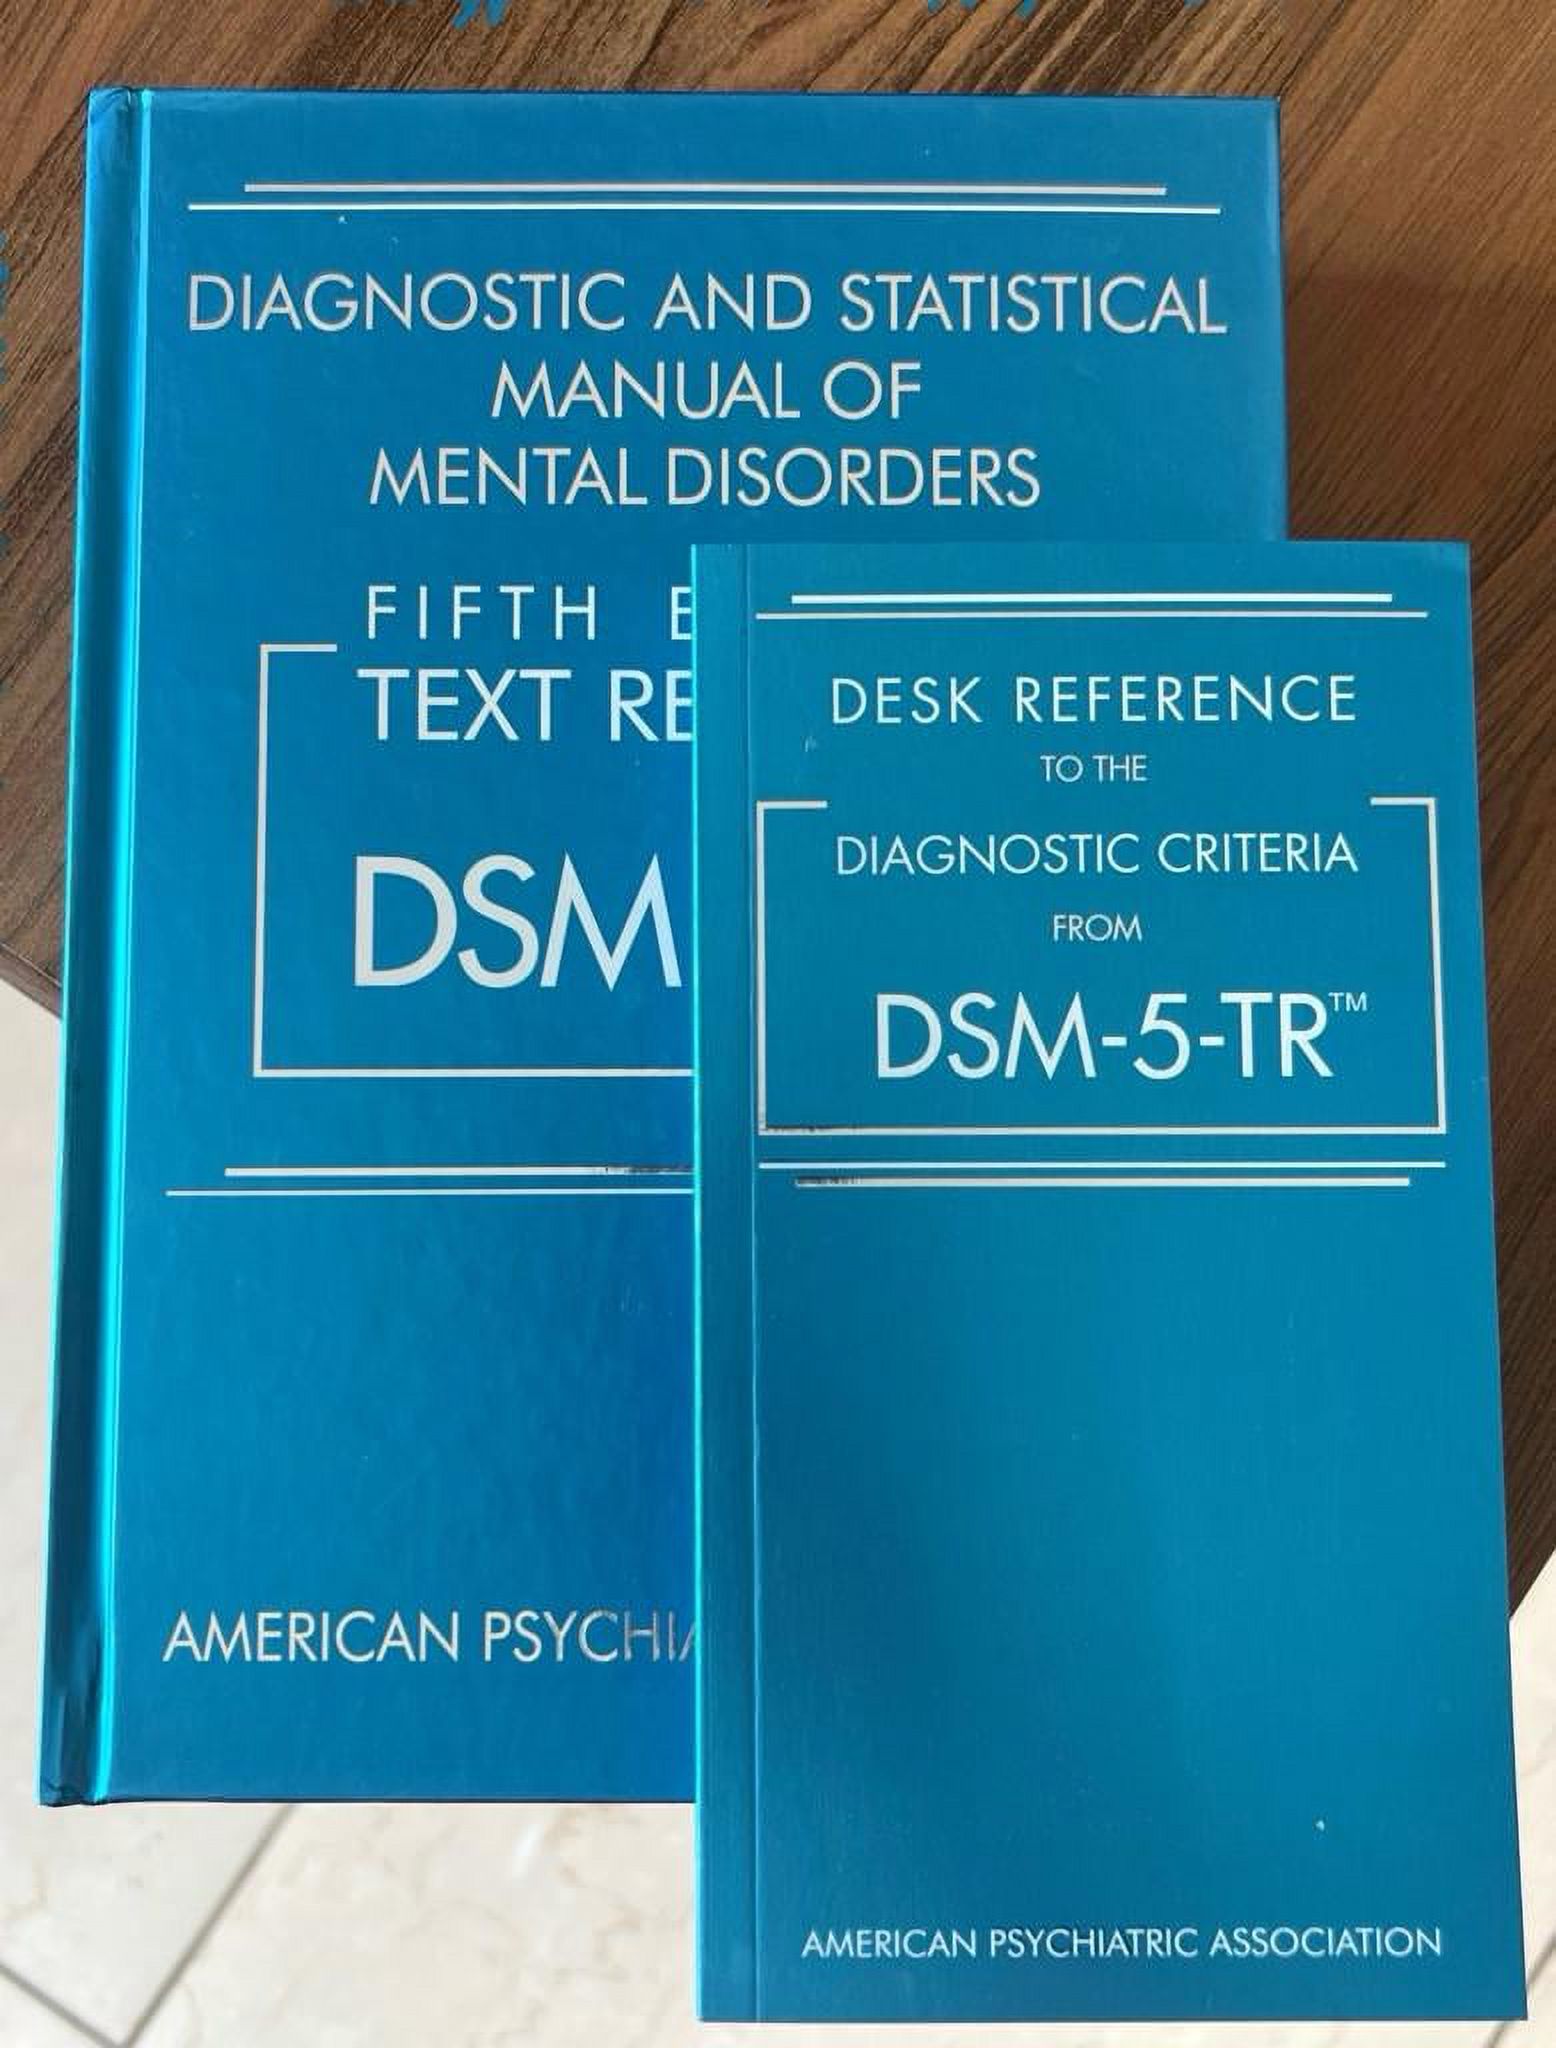 DSM 5 tr Diagnostic and Statistical Manual of Mental Disorders HARDCOVER and DSM 5 tr Desk Reference Combo Pack - image 1 of 1